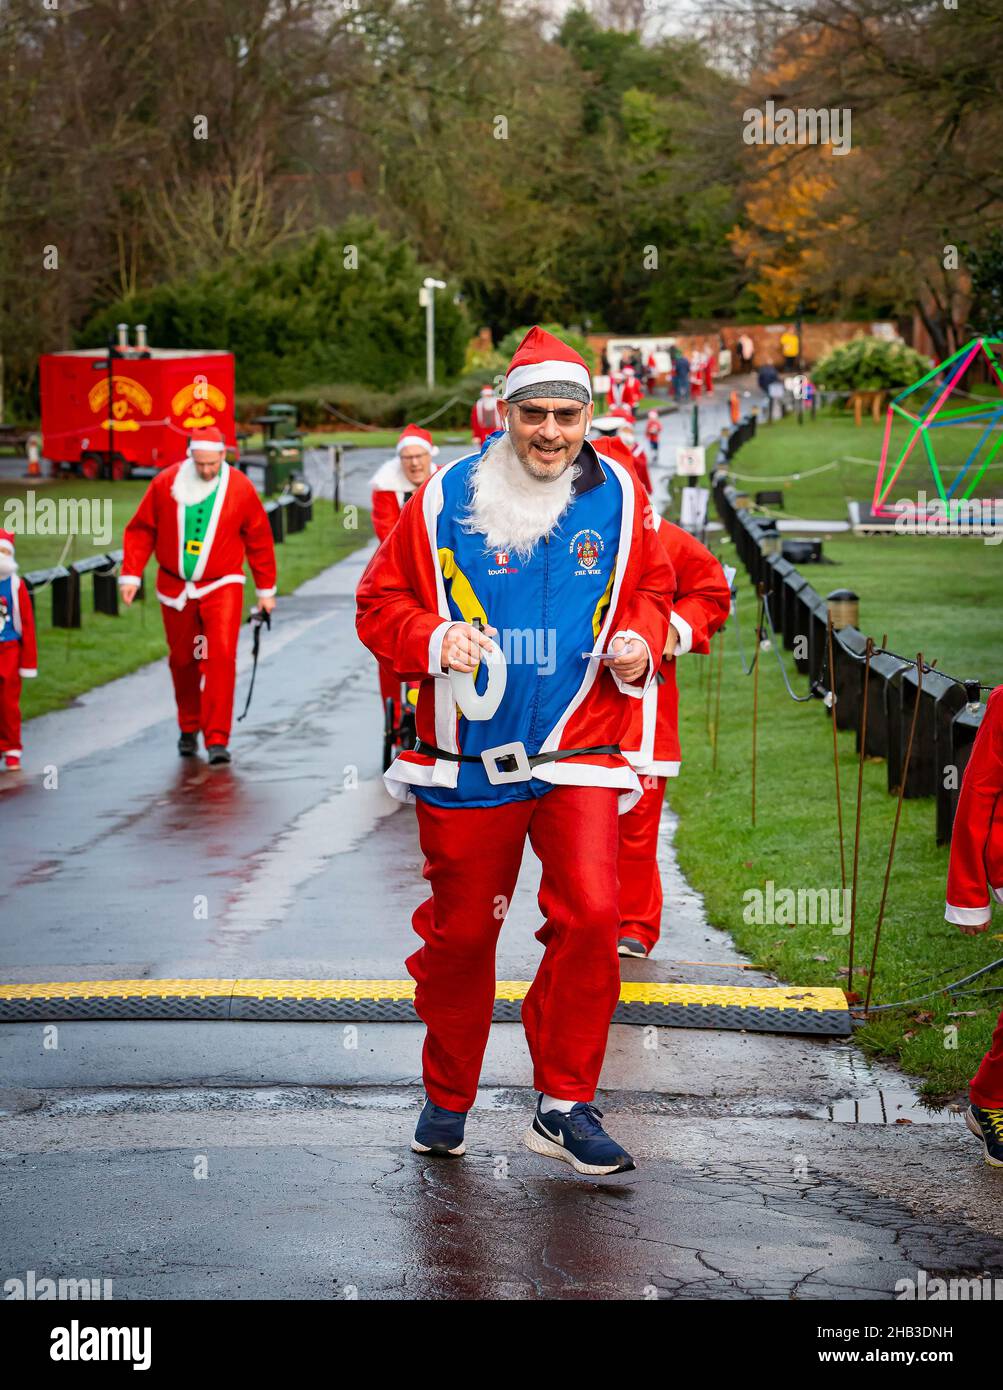 Man with own beard, ear pods and headband running in a Santa Dash Stock Photo